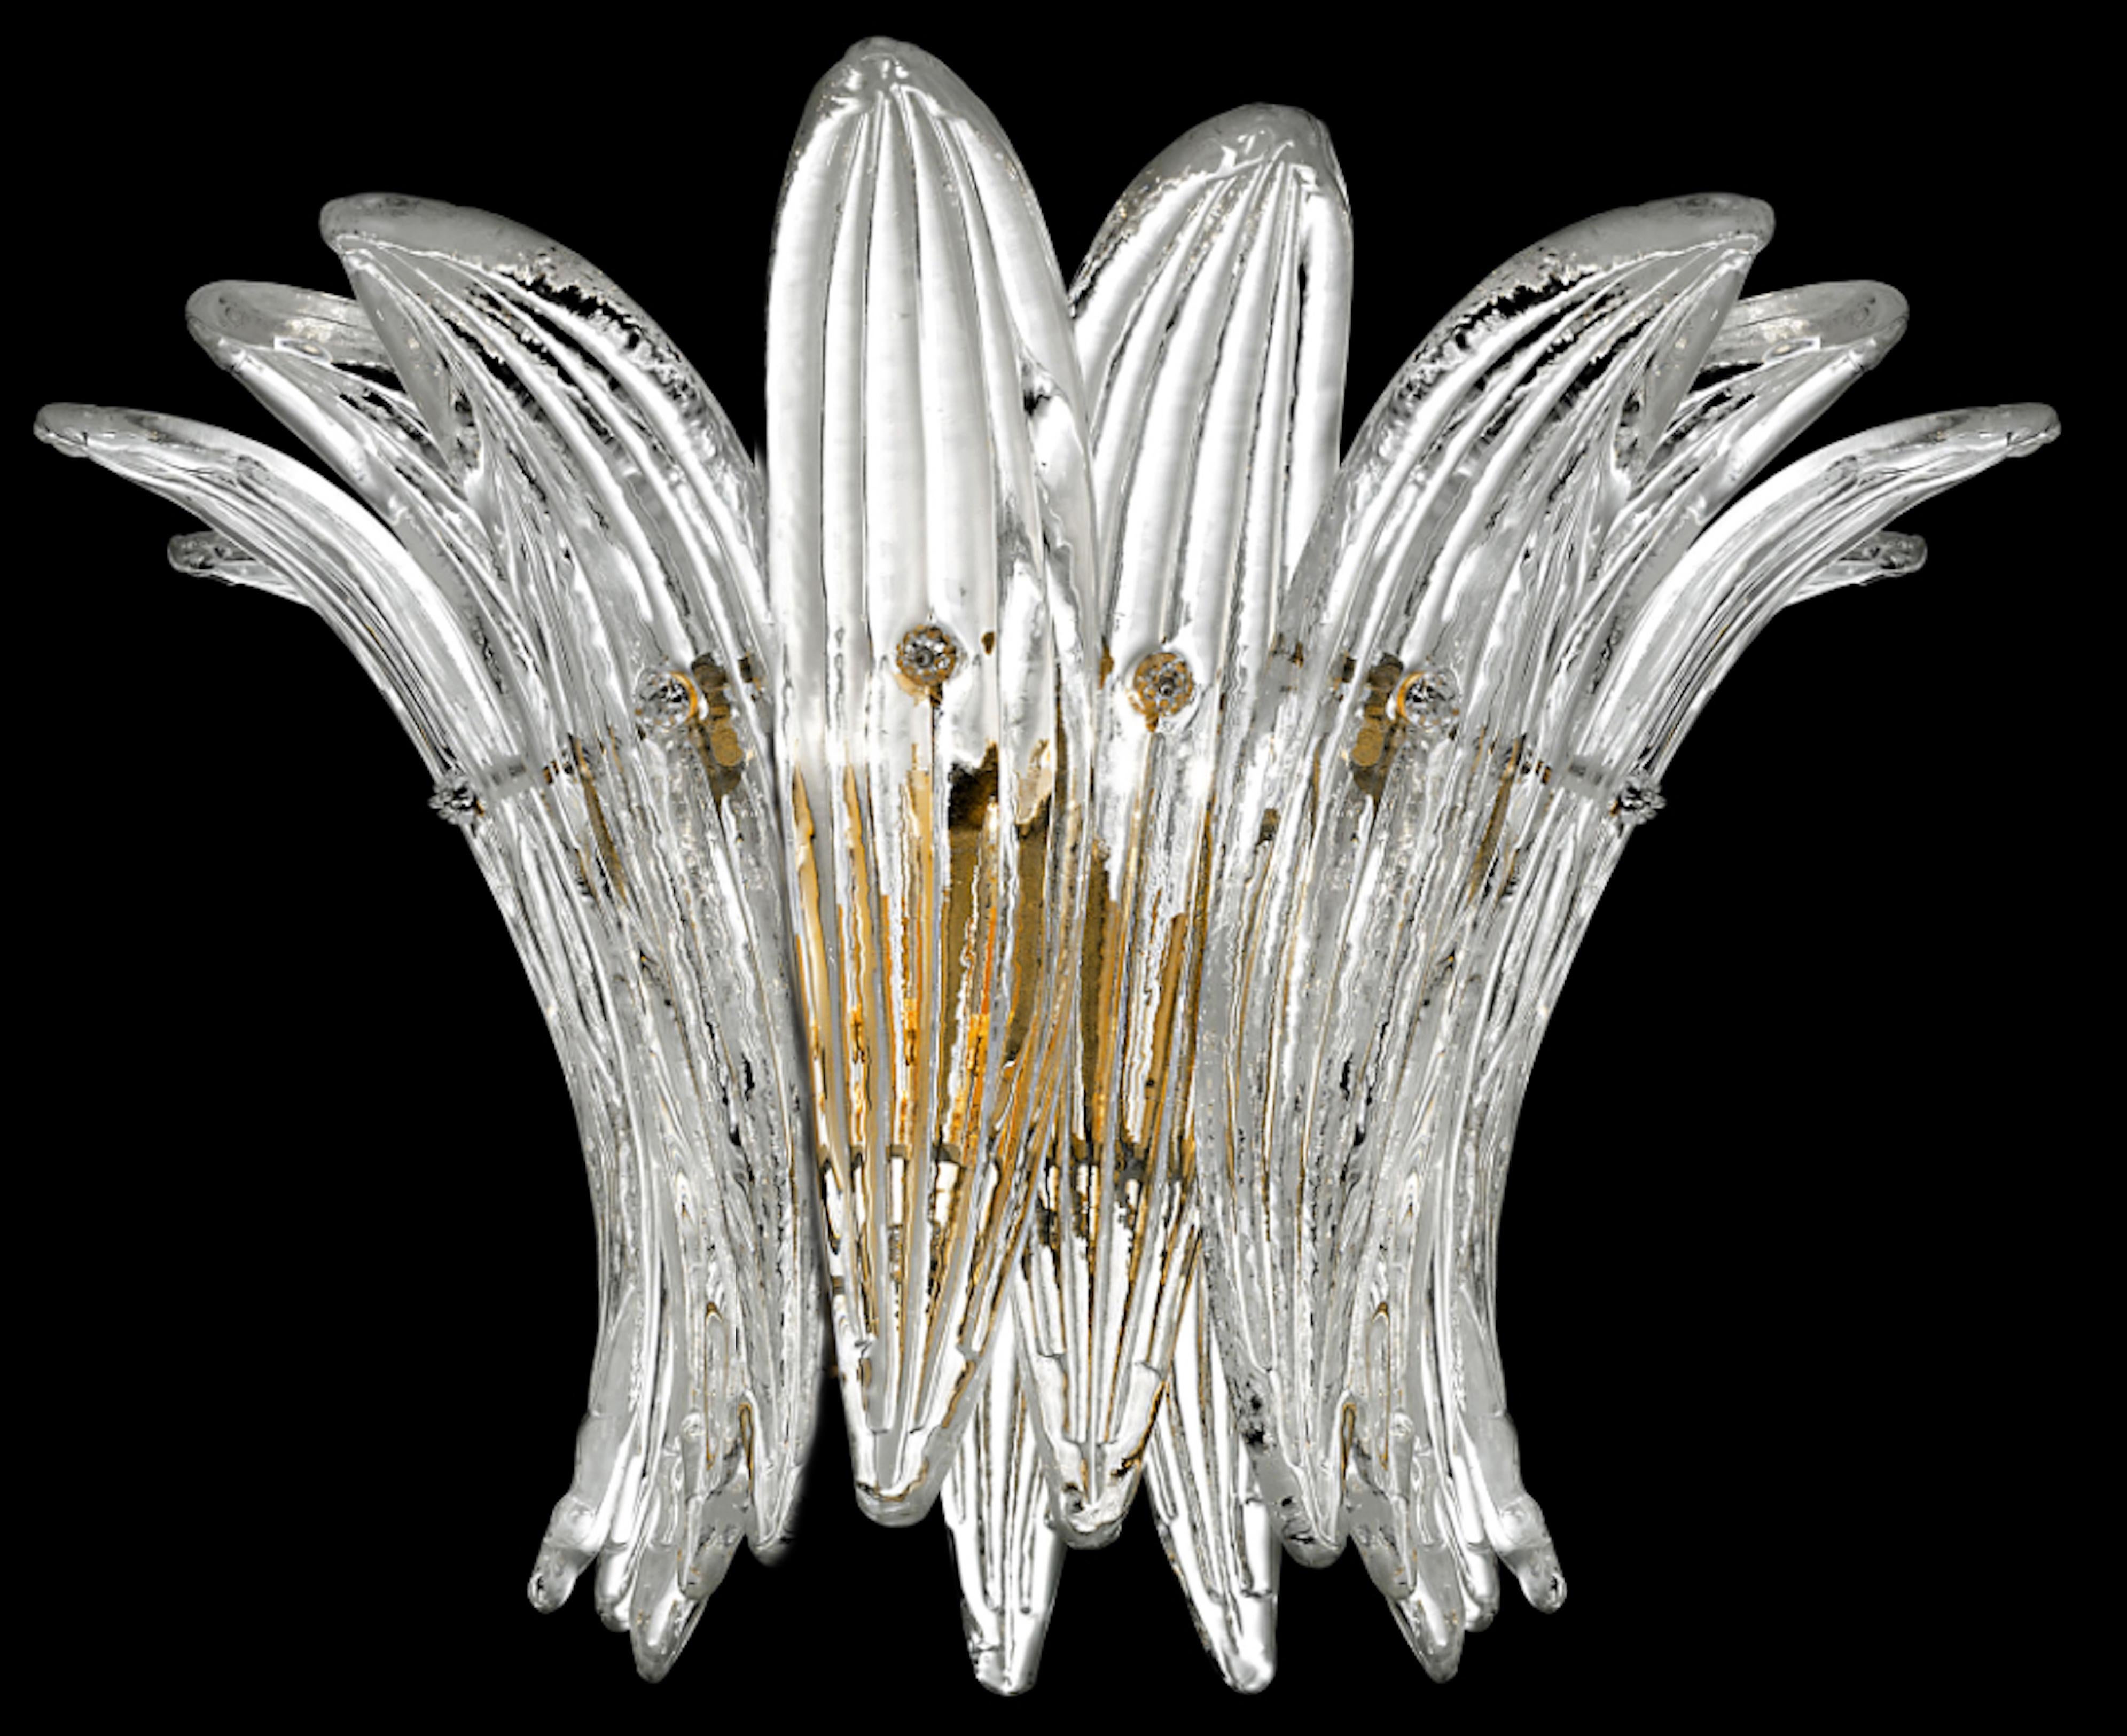 Pair of sconces in the style of Barovier & Toso.
Each sconce is composed of 9 palmettes in pure Murano glass arranged horizontally.